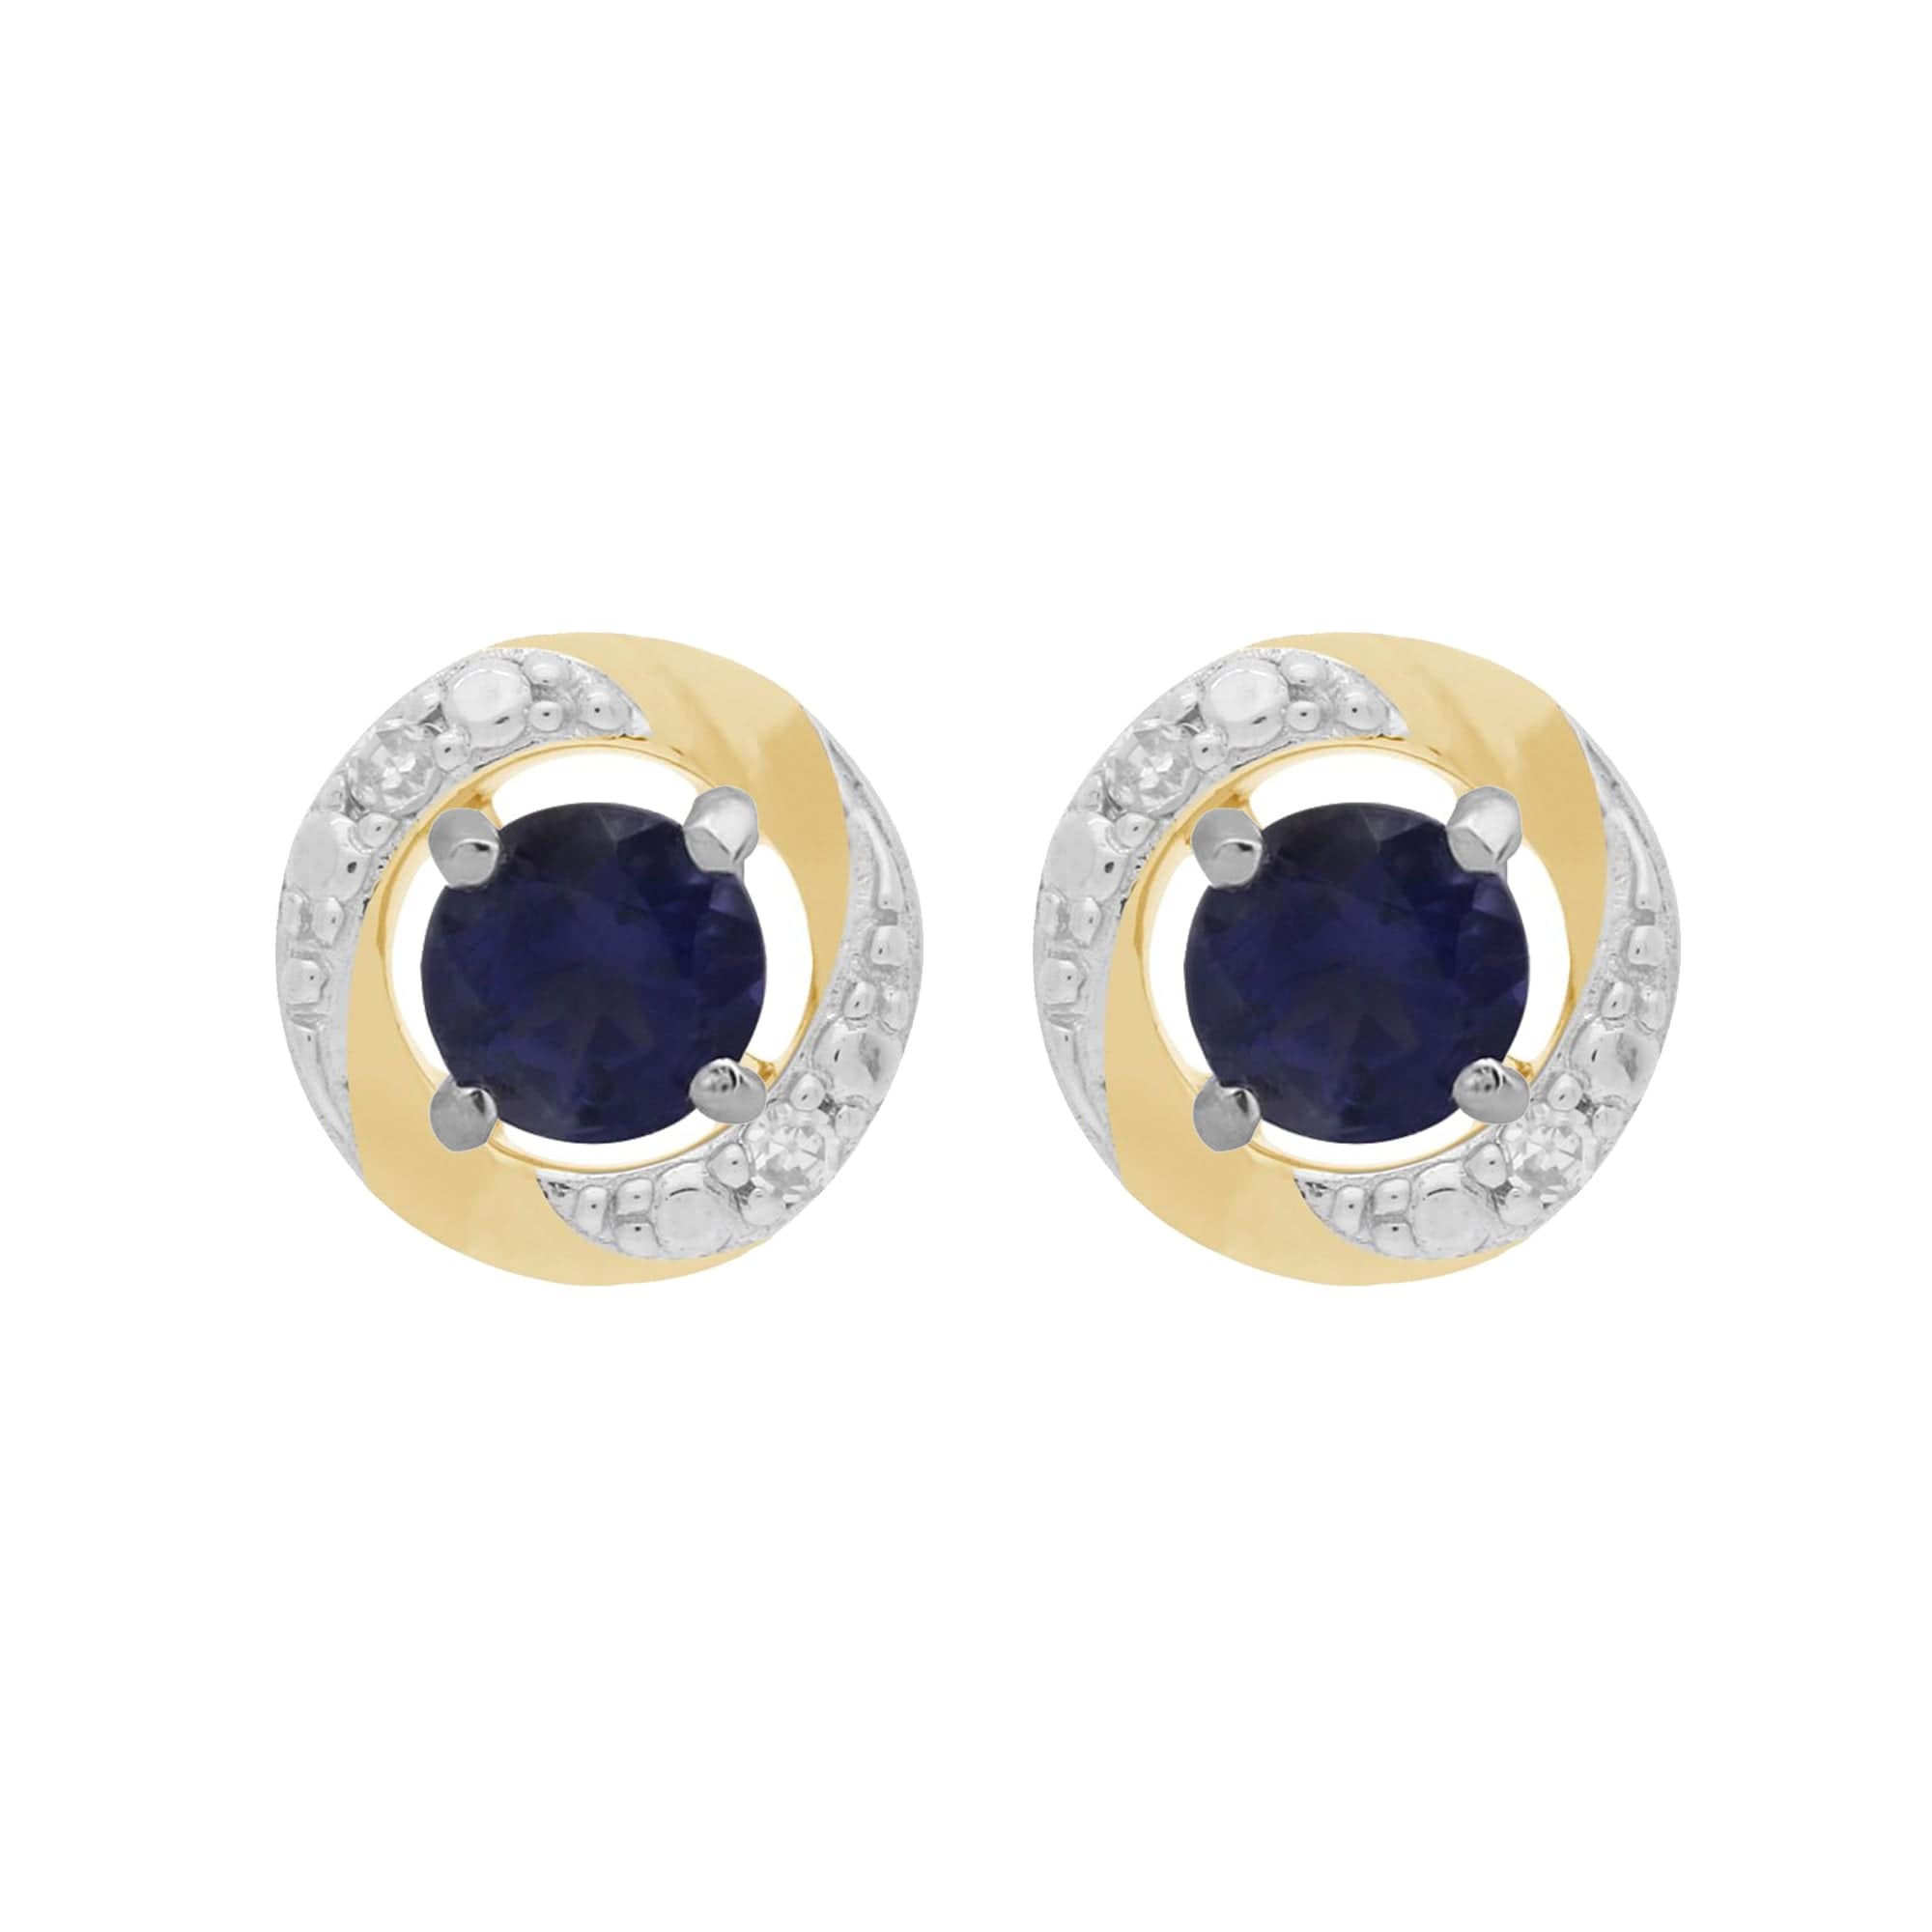 162E0071189-191E0374019 9ct White Gold Iolite Stud Earrings with Detachable Diamond Halo Ear Jacket in 9ct Yellow Gold 1